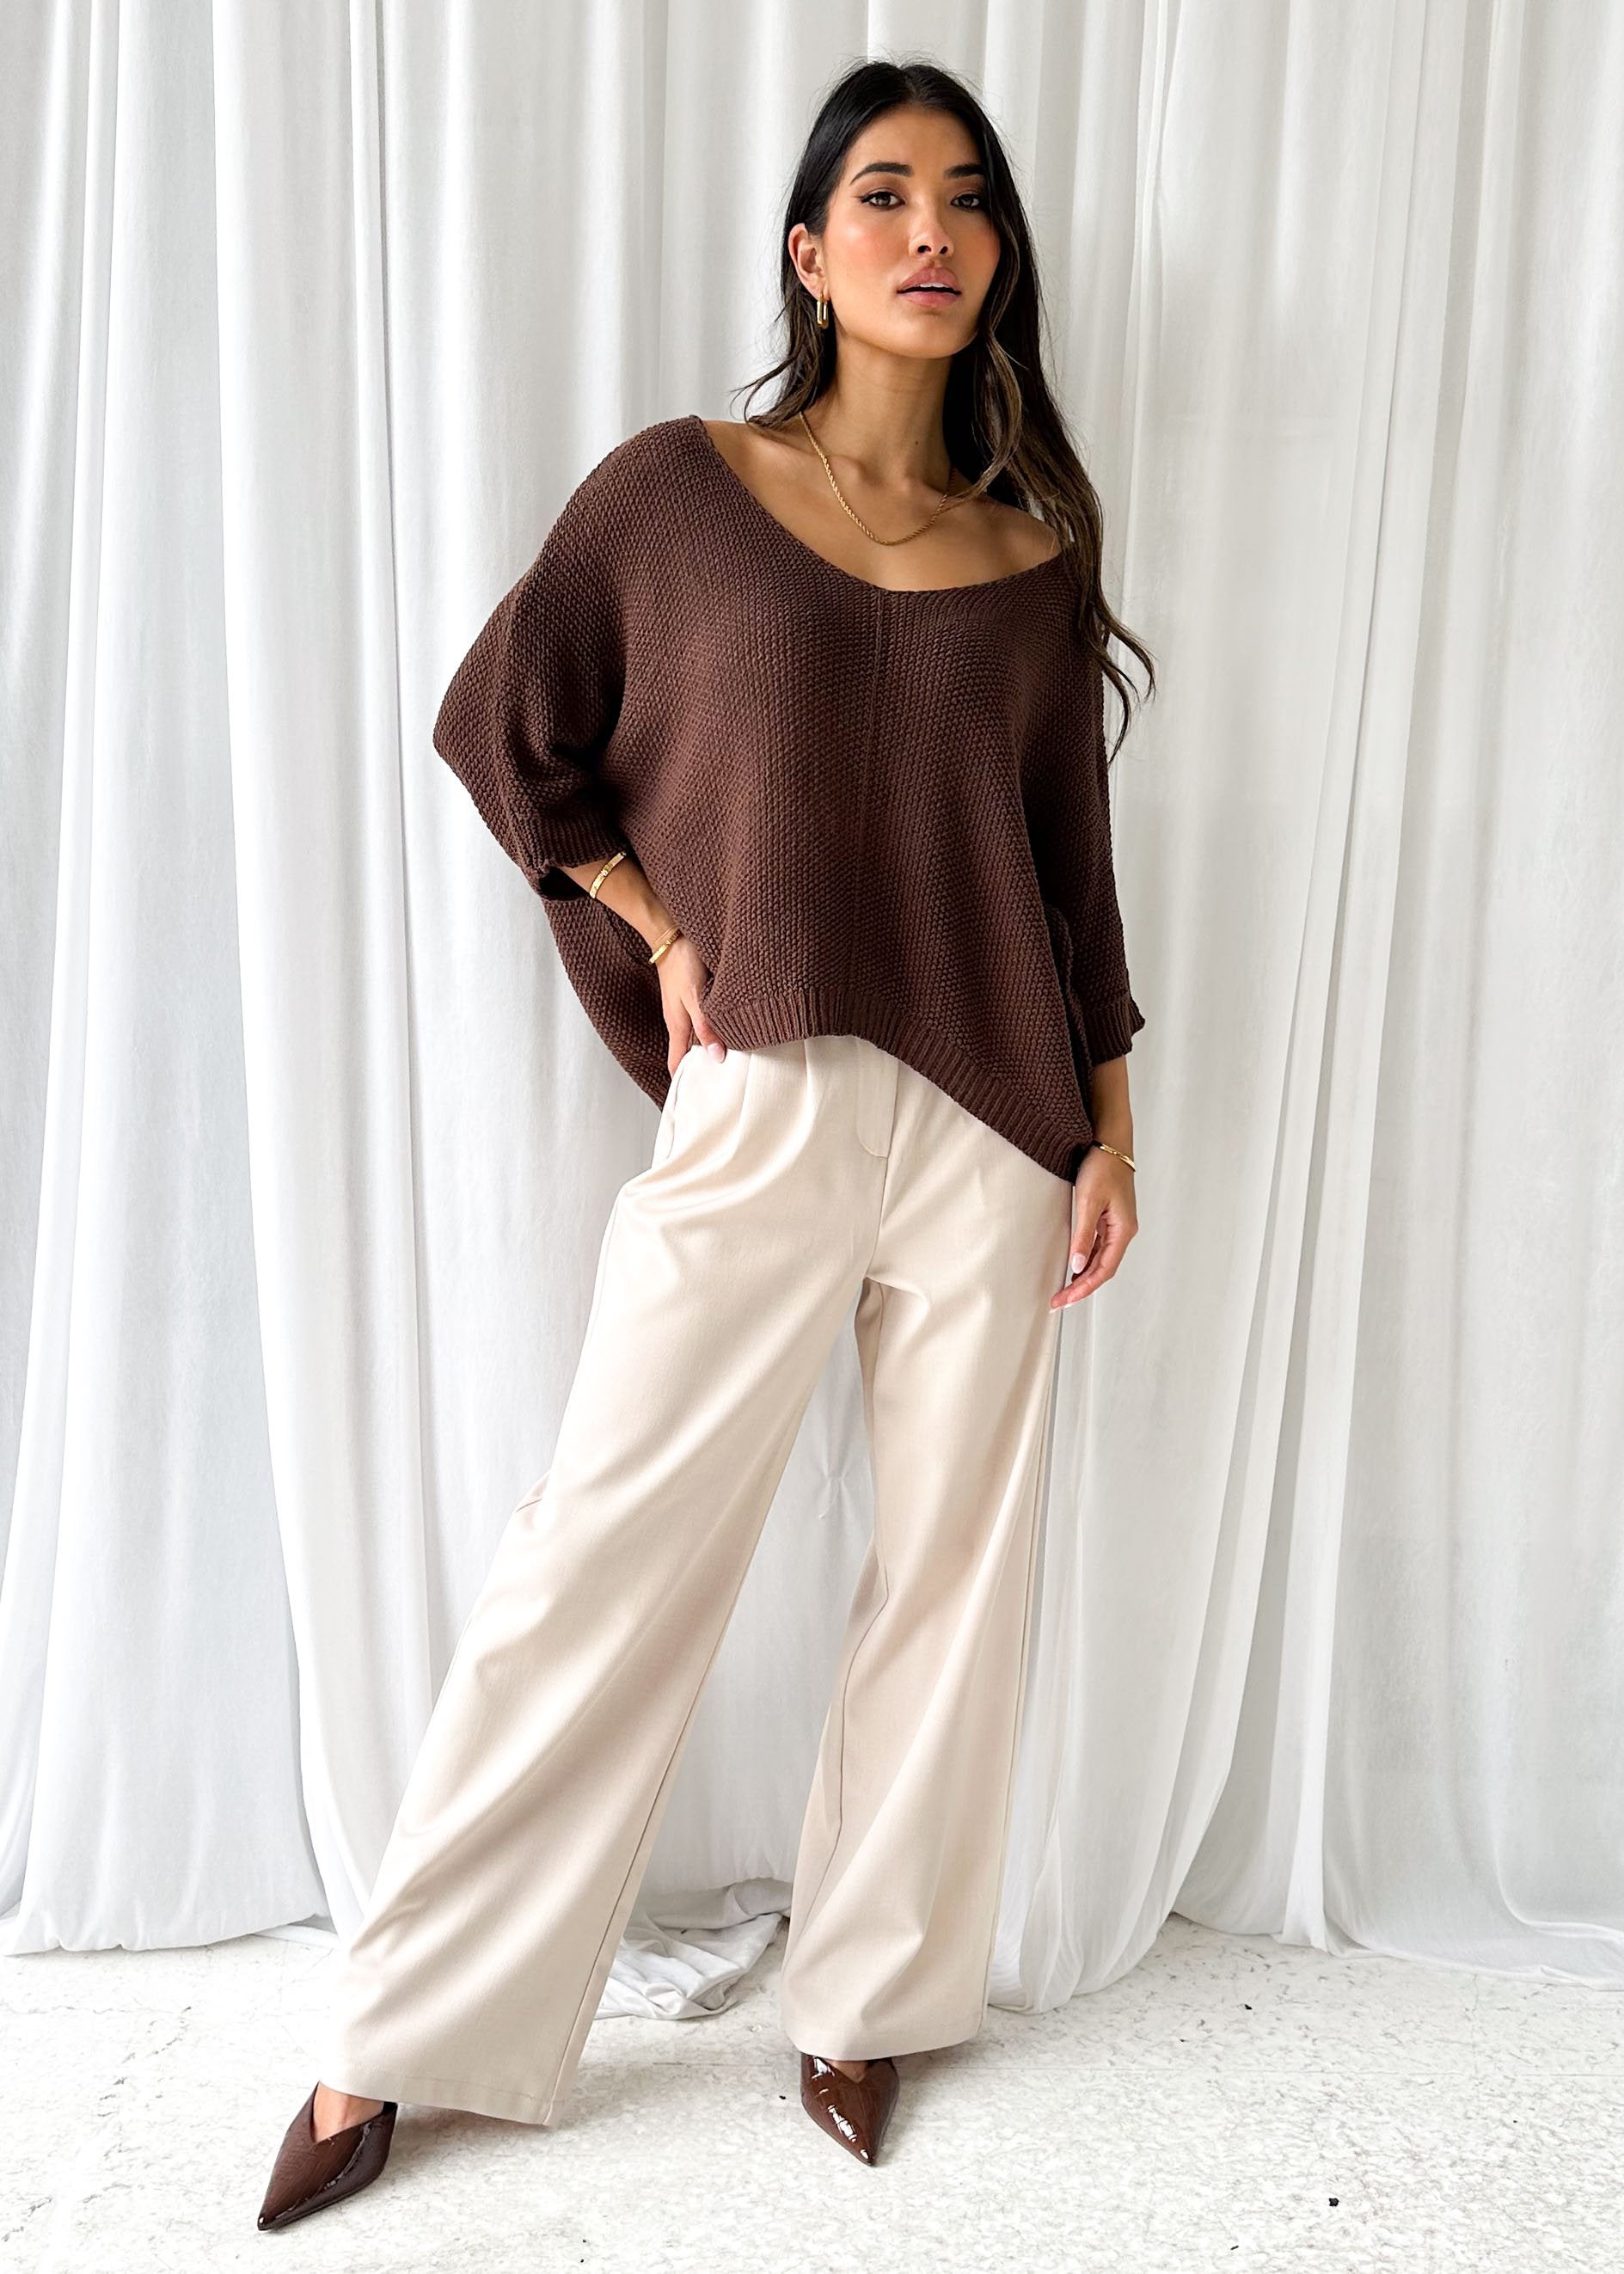 Sovra Knit Top - Chocolate